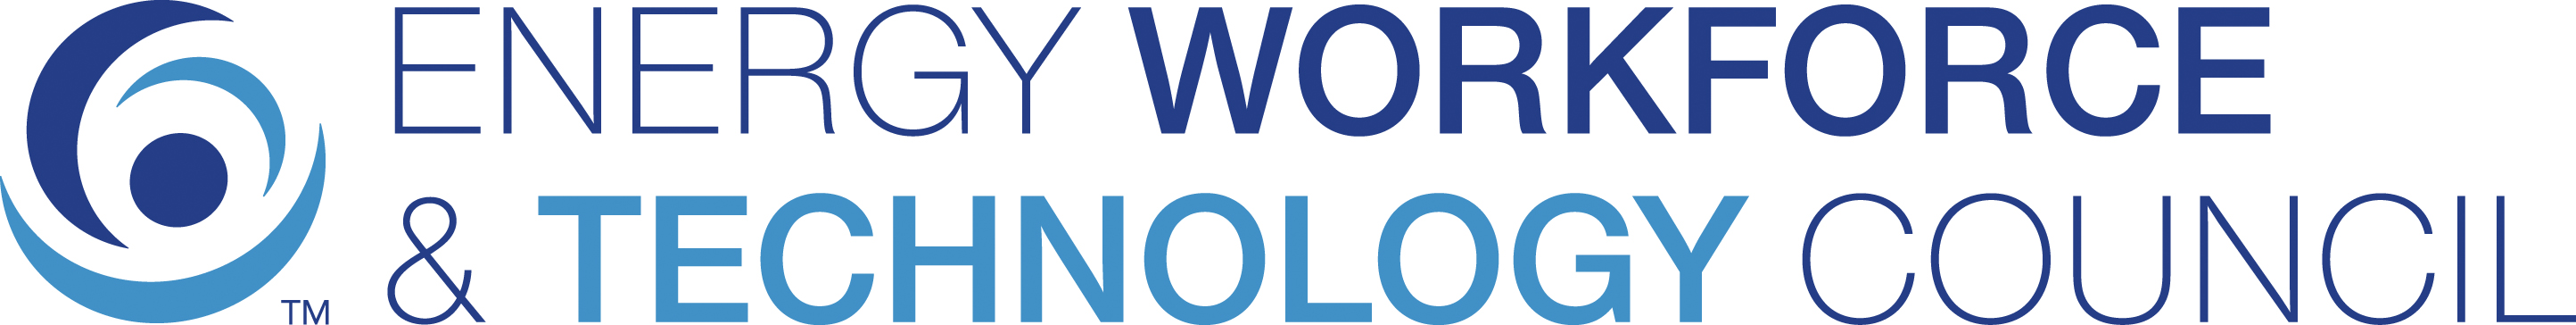 Energy Workforce And Technology Council Logo